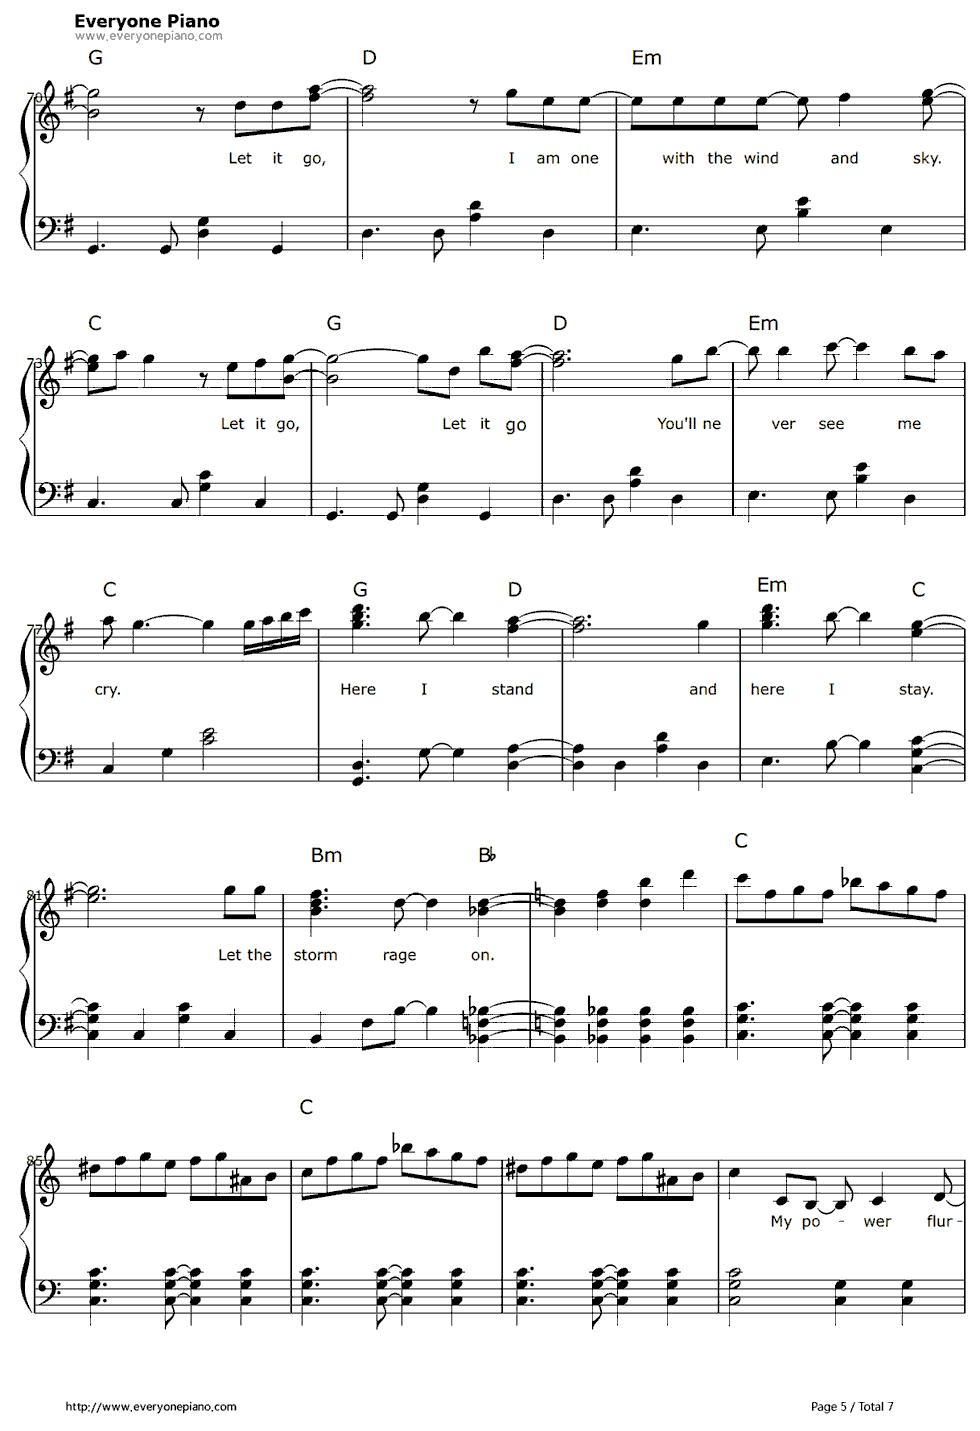 Free Let It Go Easy Version-Frozen Theme Sheet Music Preview 5 - Let It Go Piano Sheet Music Free Printable